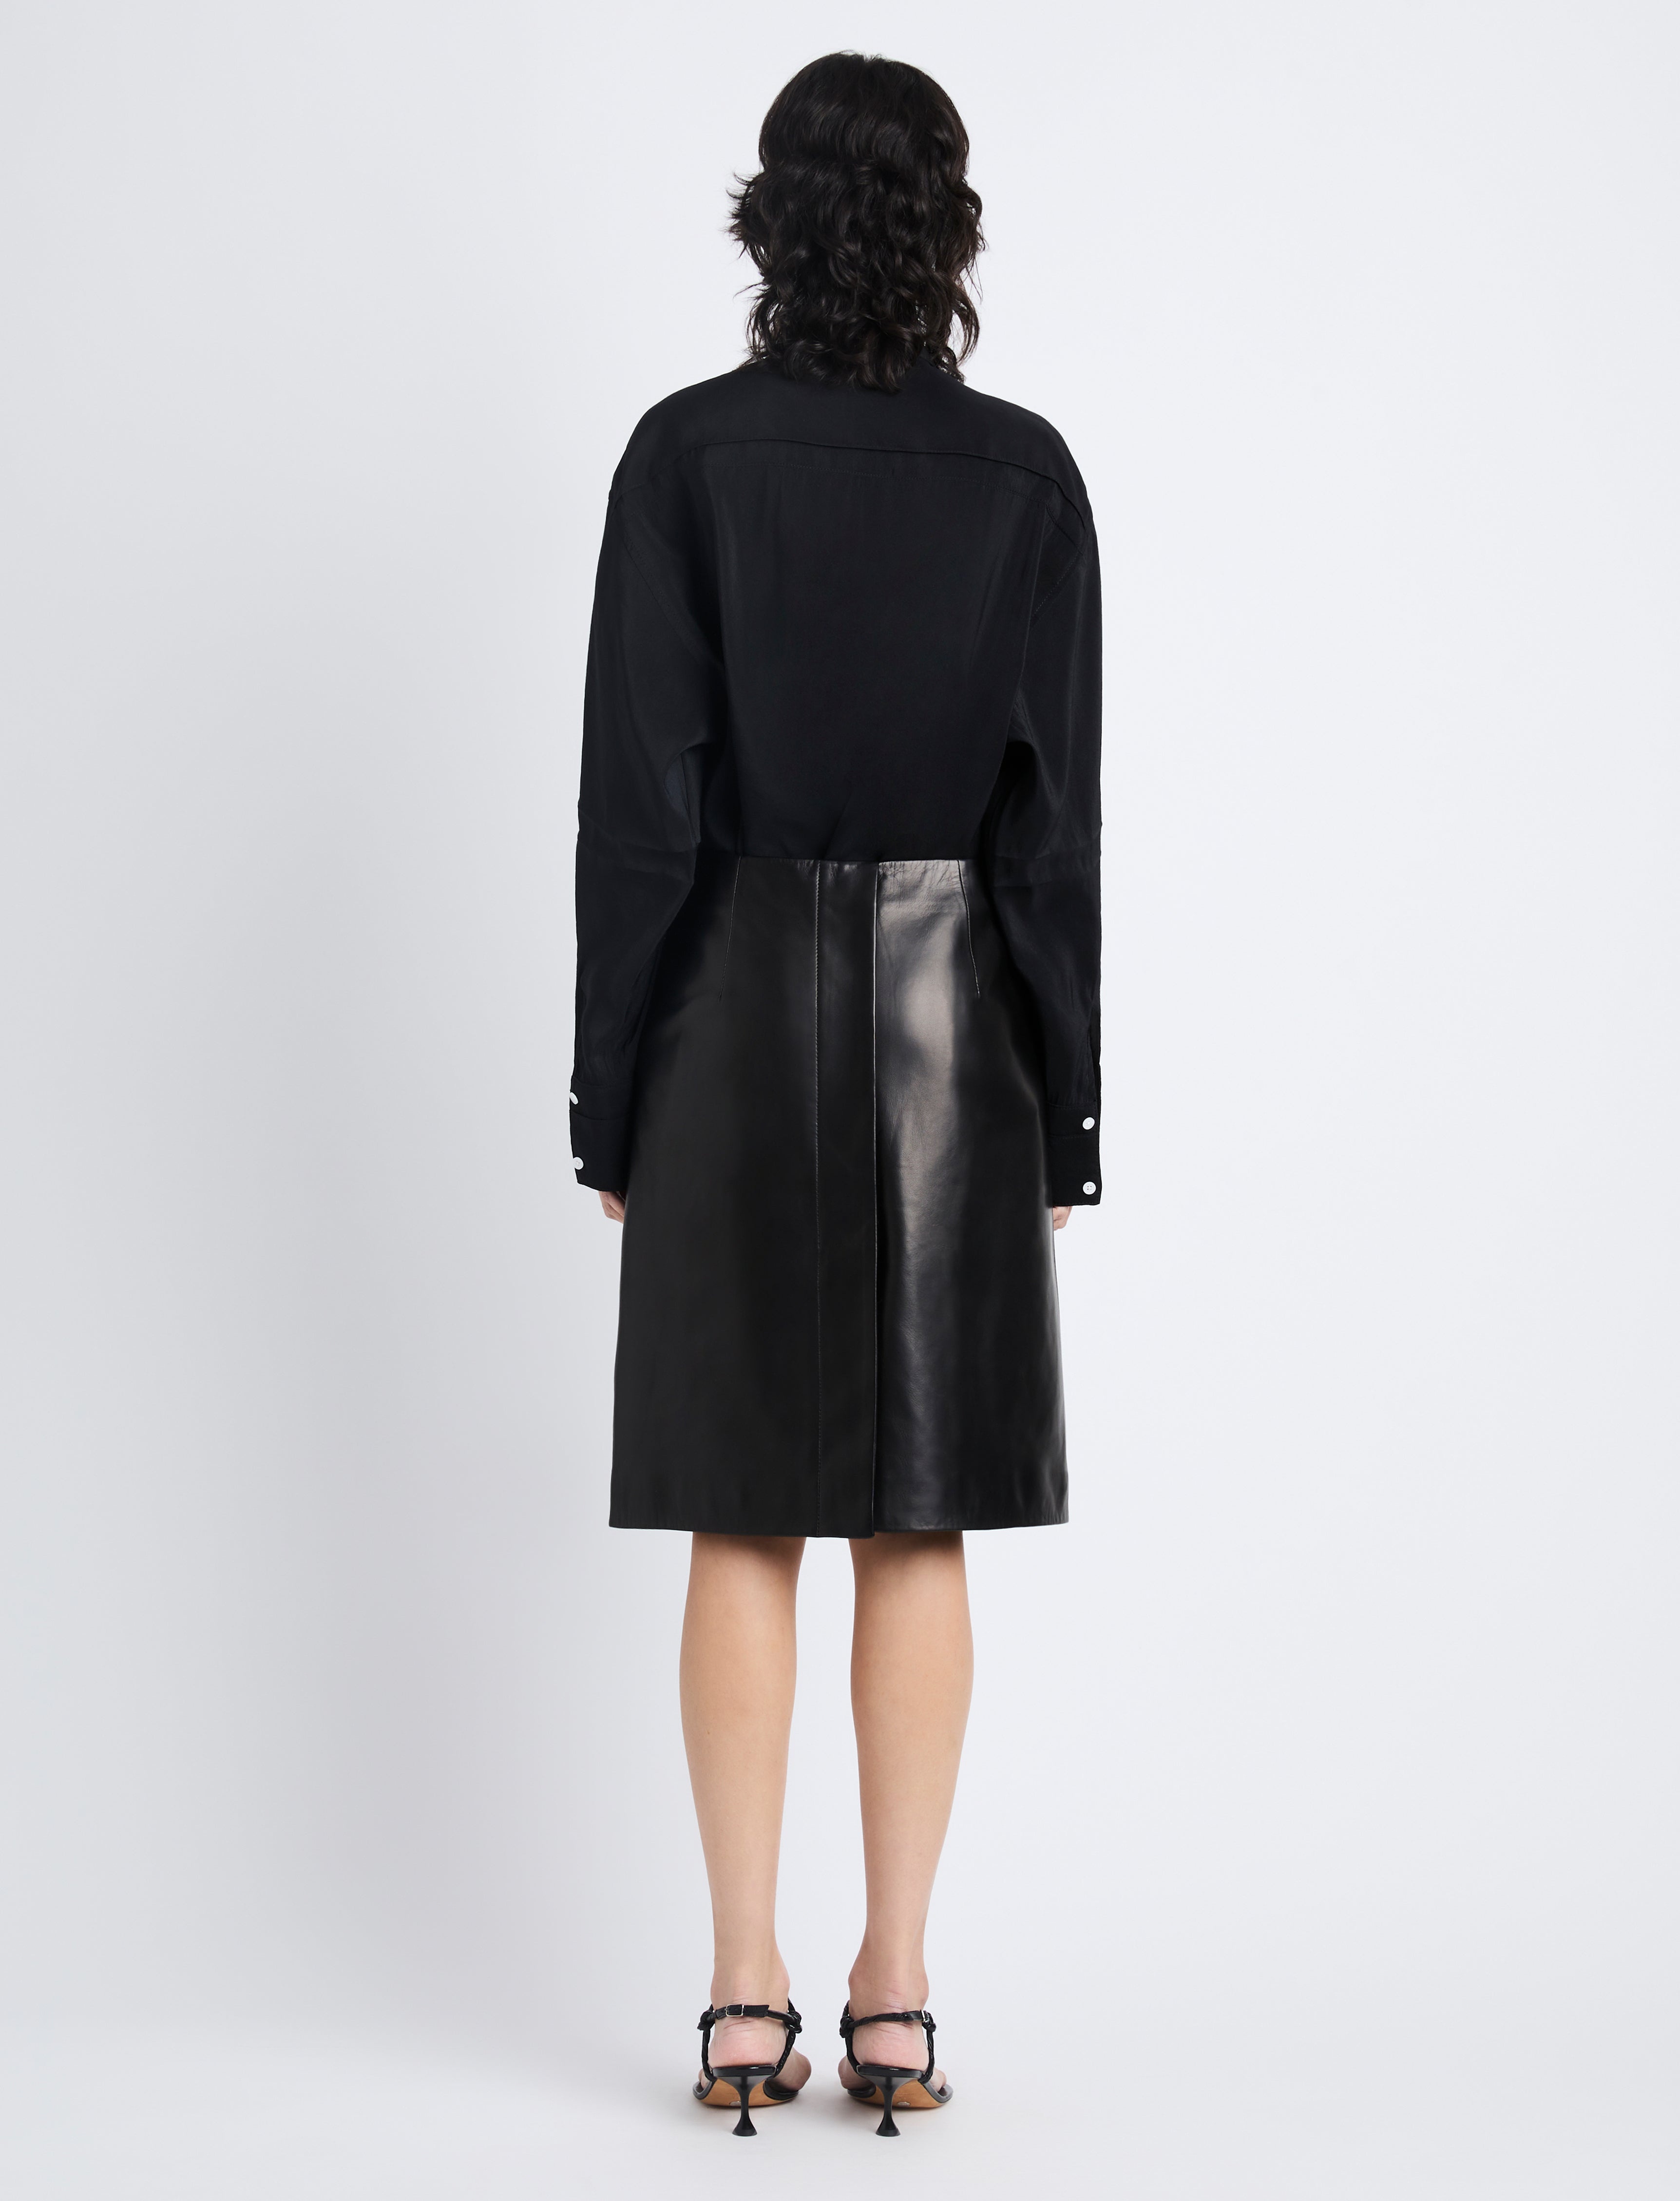 Adele Skirt in Leather - 5